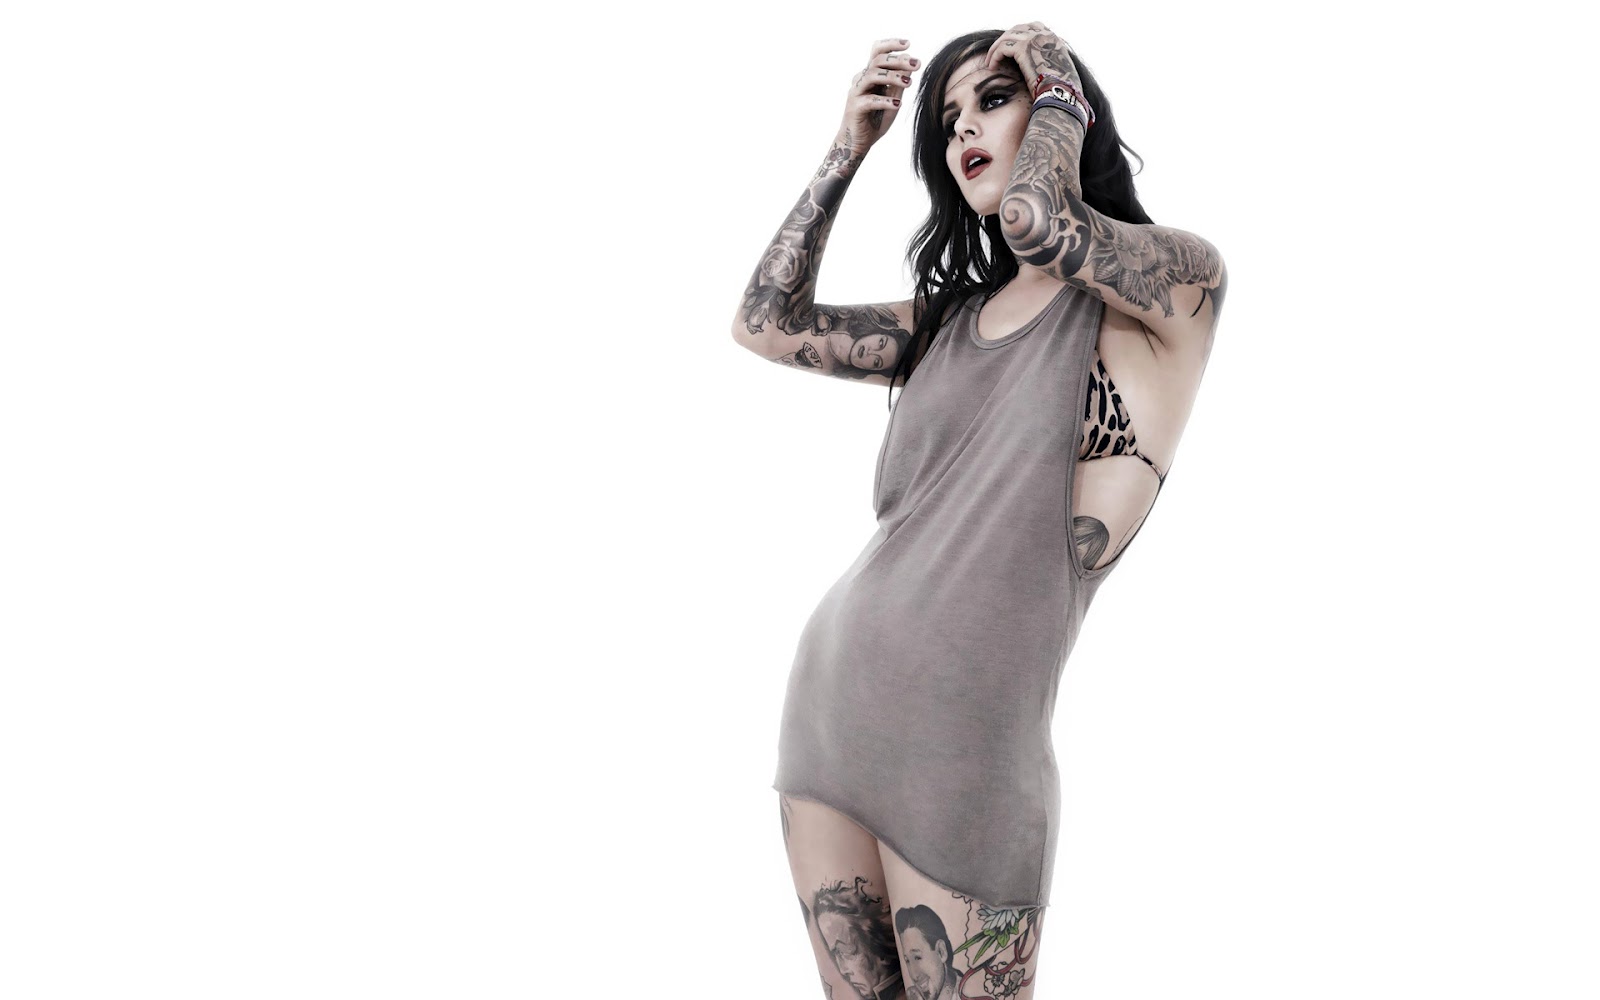  other wallpapers of Kat Von D Wallpapers Tattoo as often as possible